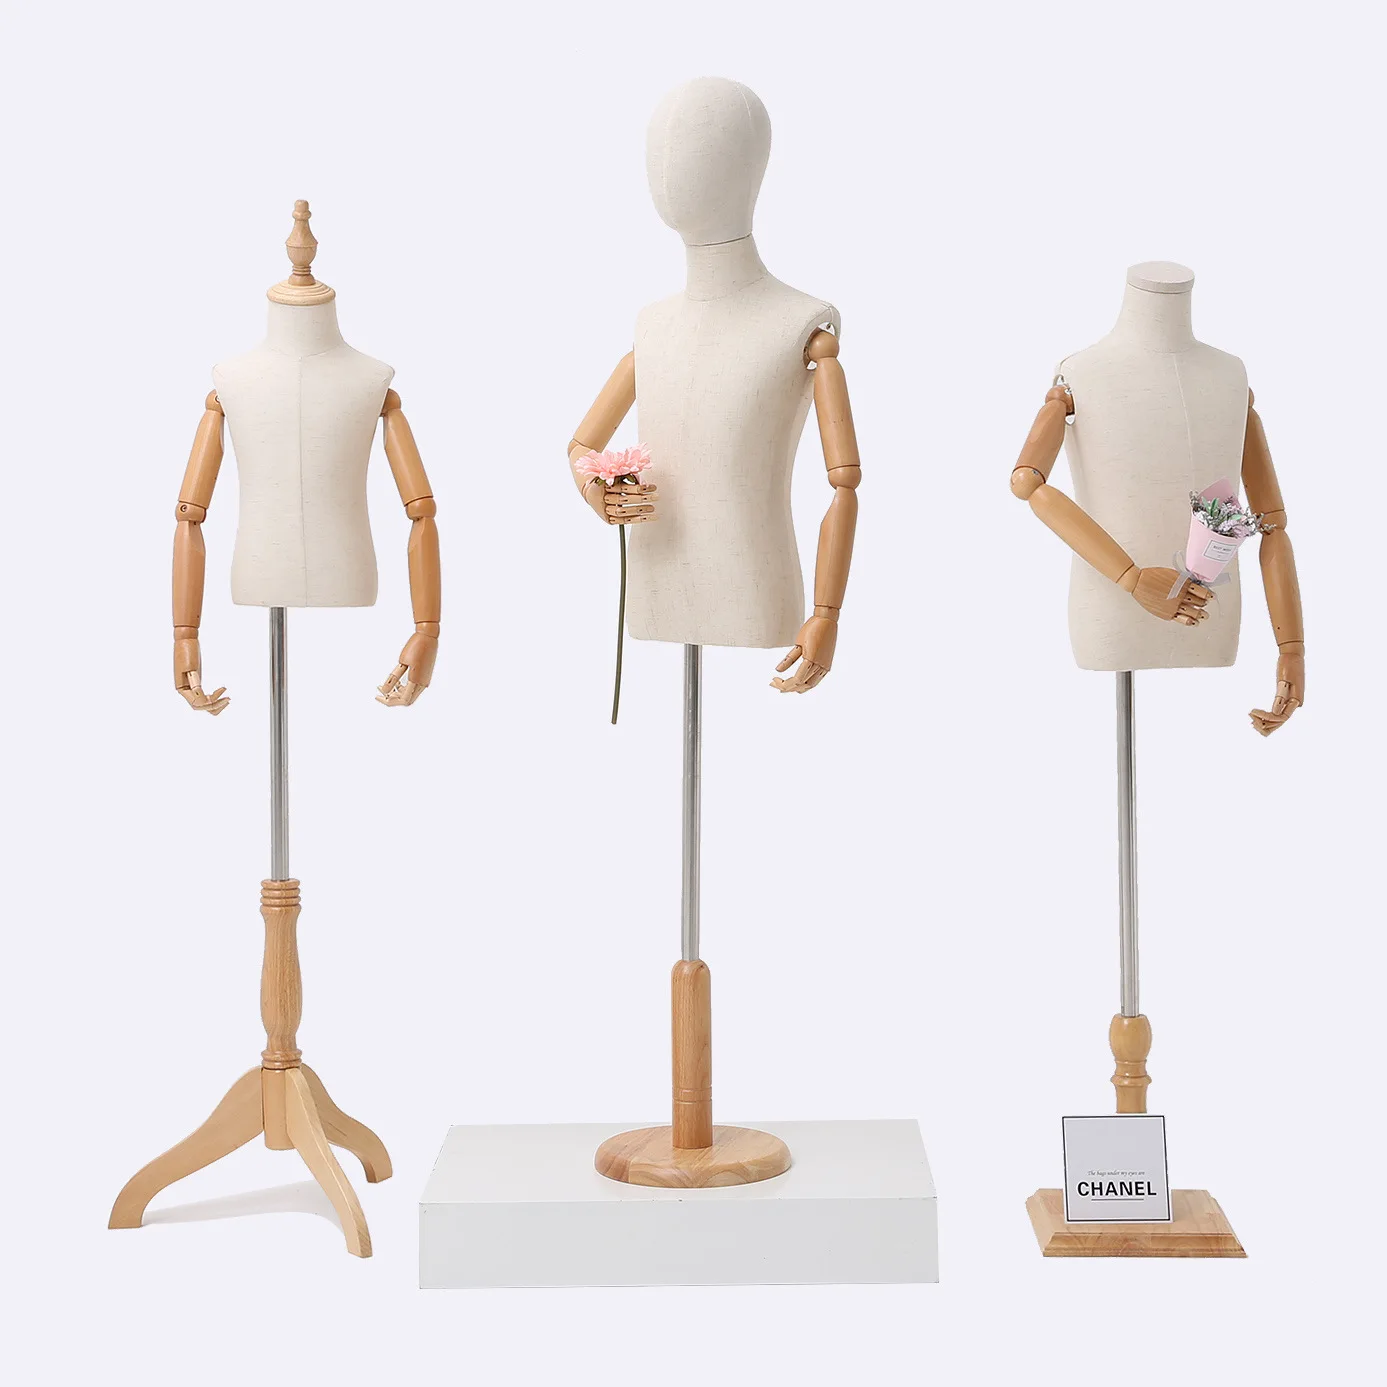 Kid Dress Form Fabric Cover Half Body Children's Model Mannequin Model Torso Wood Base With Wooden Arms For Window Display